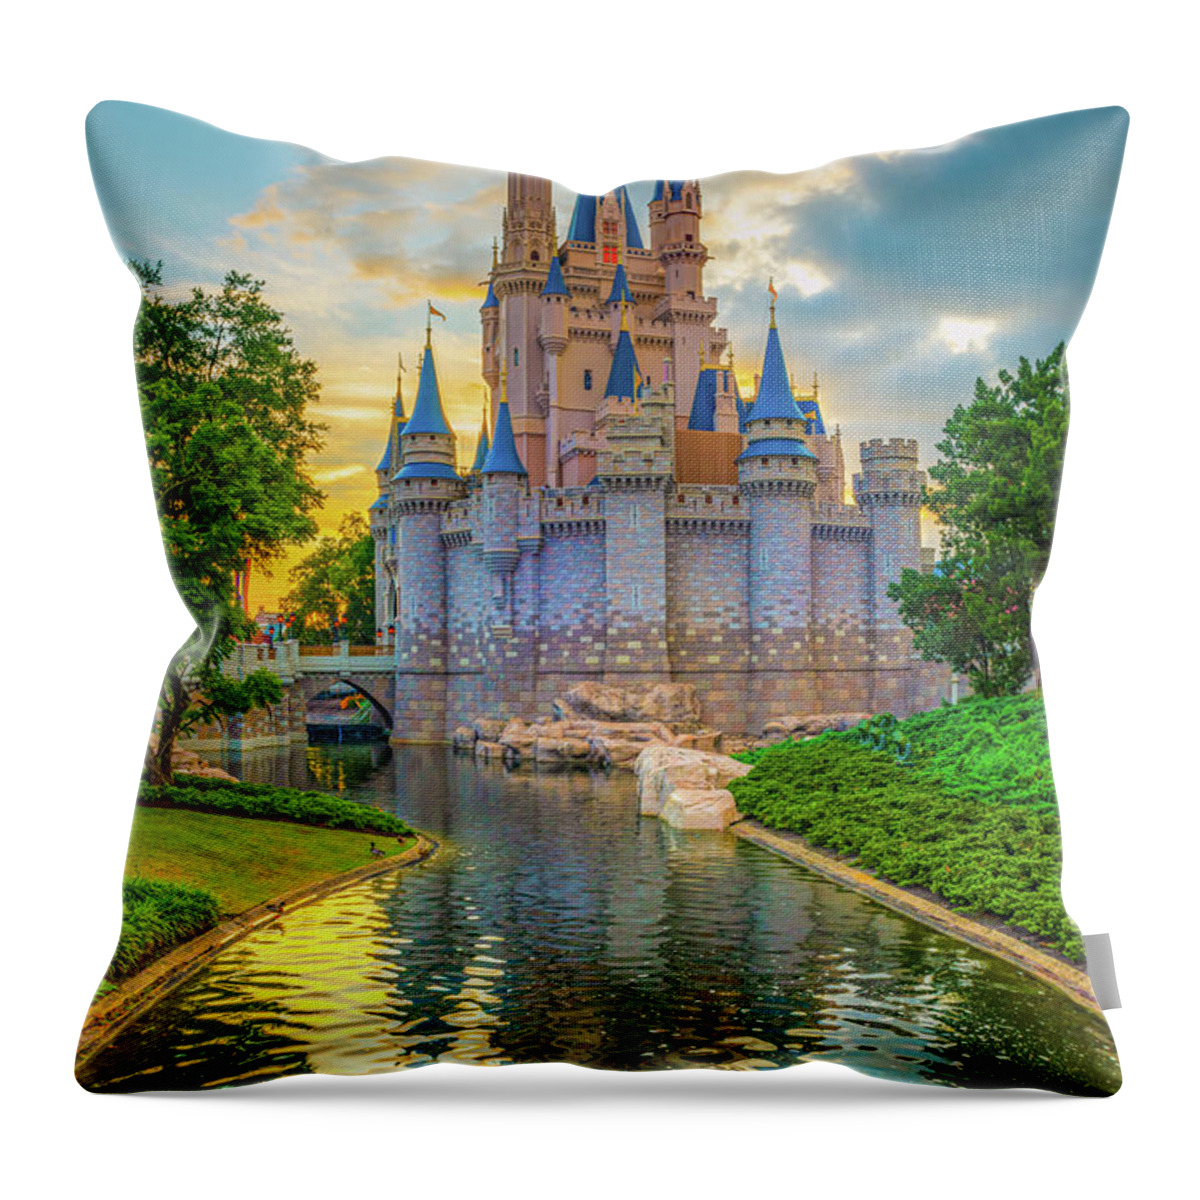 Famous Castle Throw Pillow featuring the photograph Princess Dreams At Florida's Famous Castle by Gregory Ballos